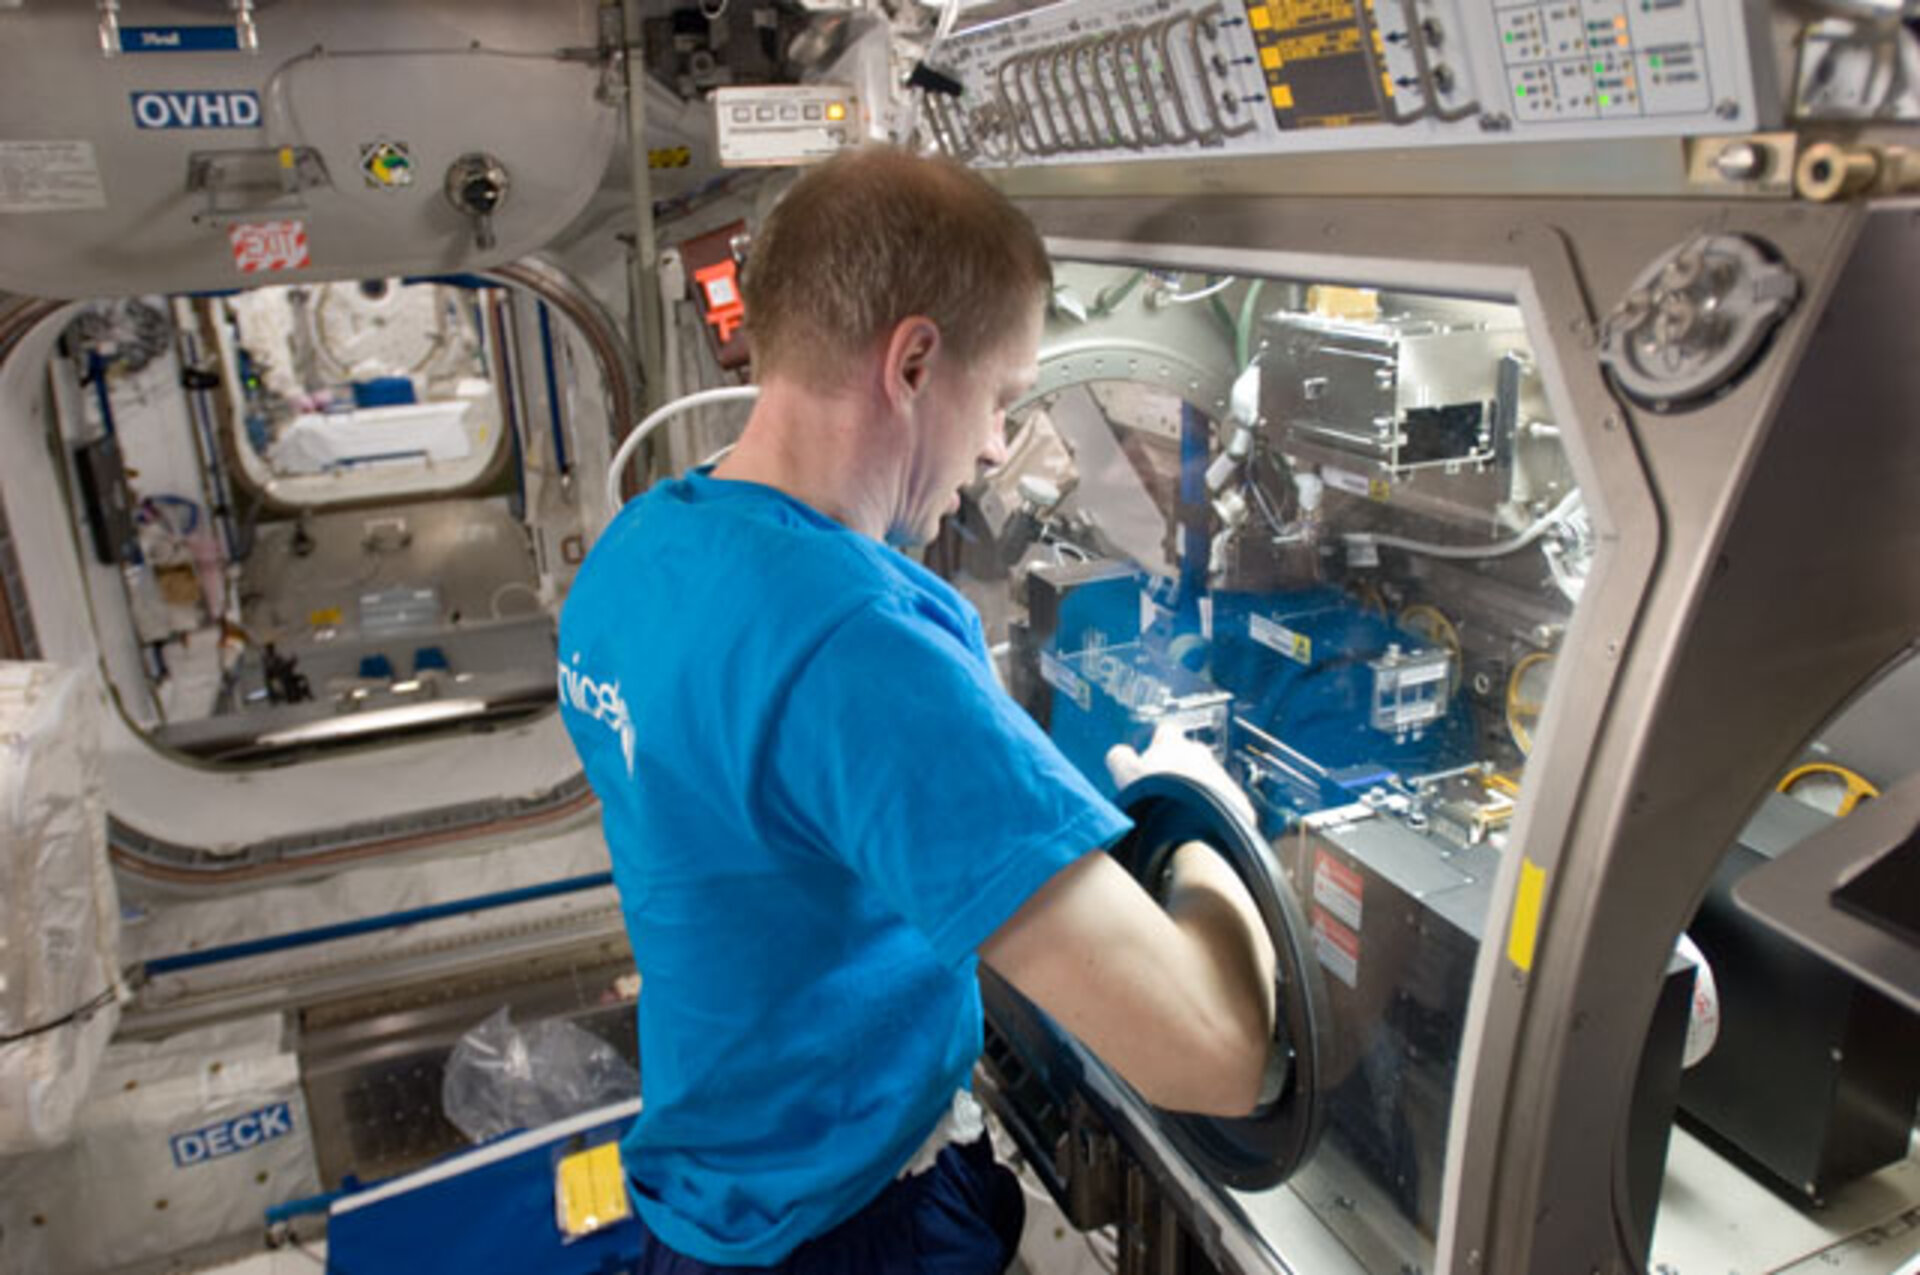 Working with the Microgravity Science Glovebox (MSG)